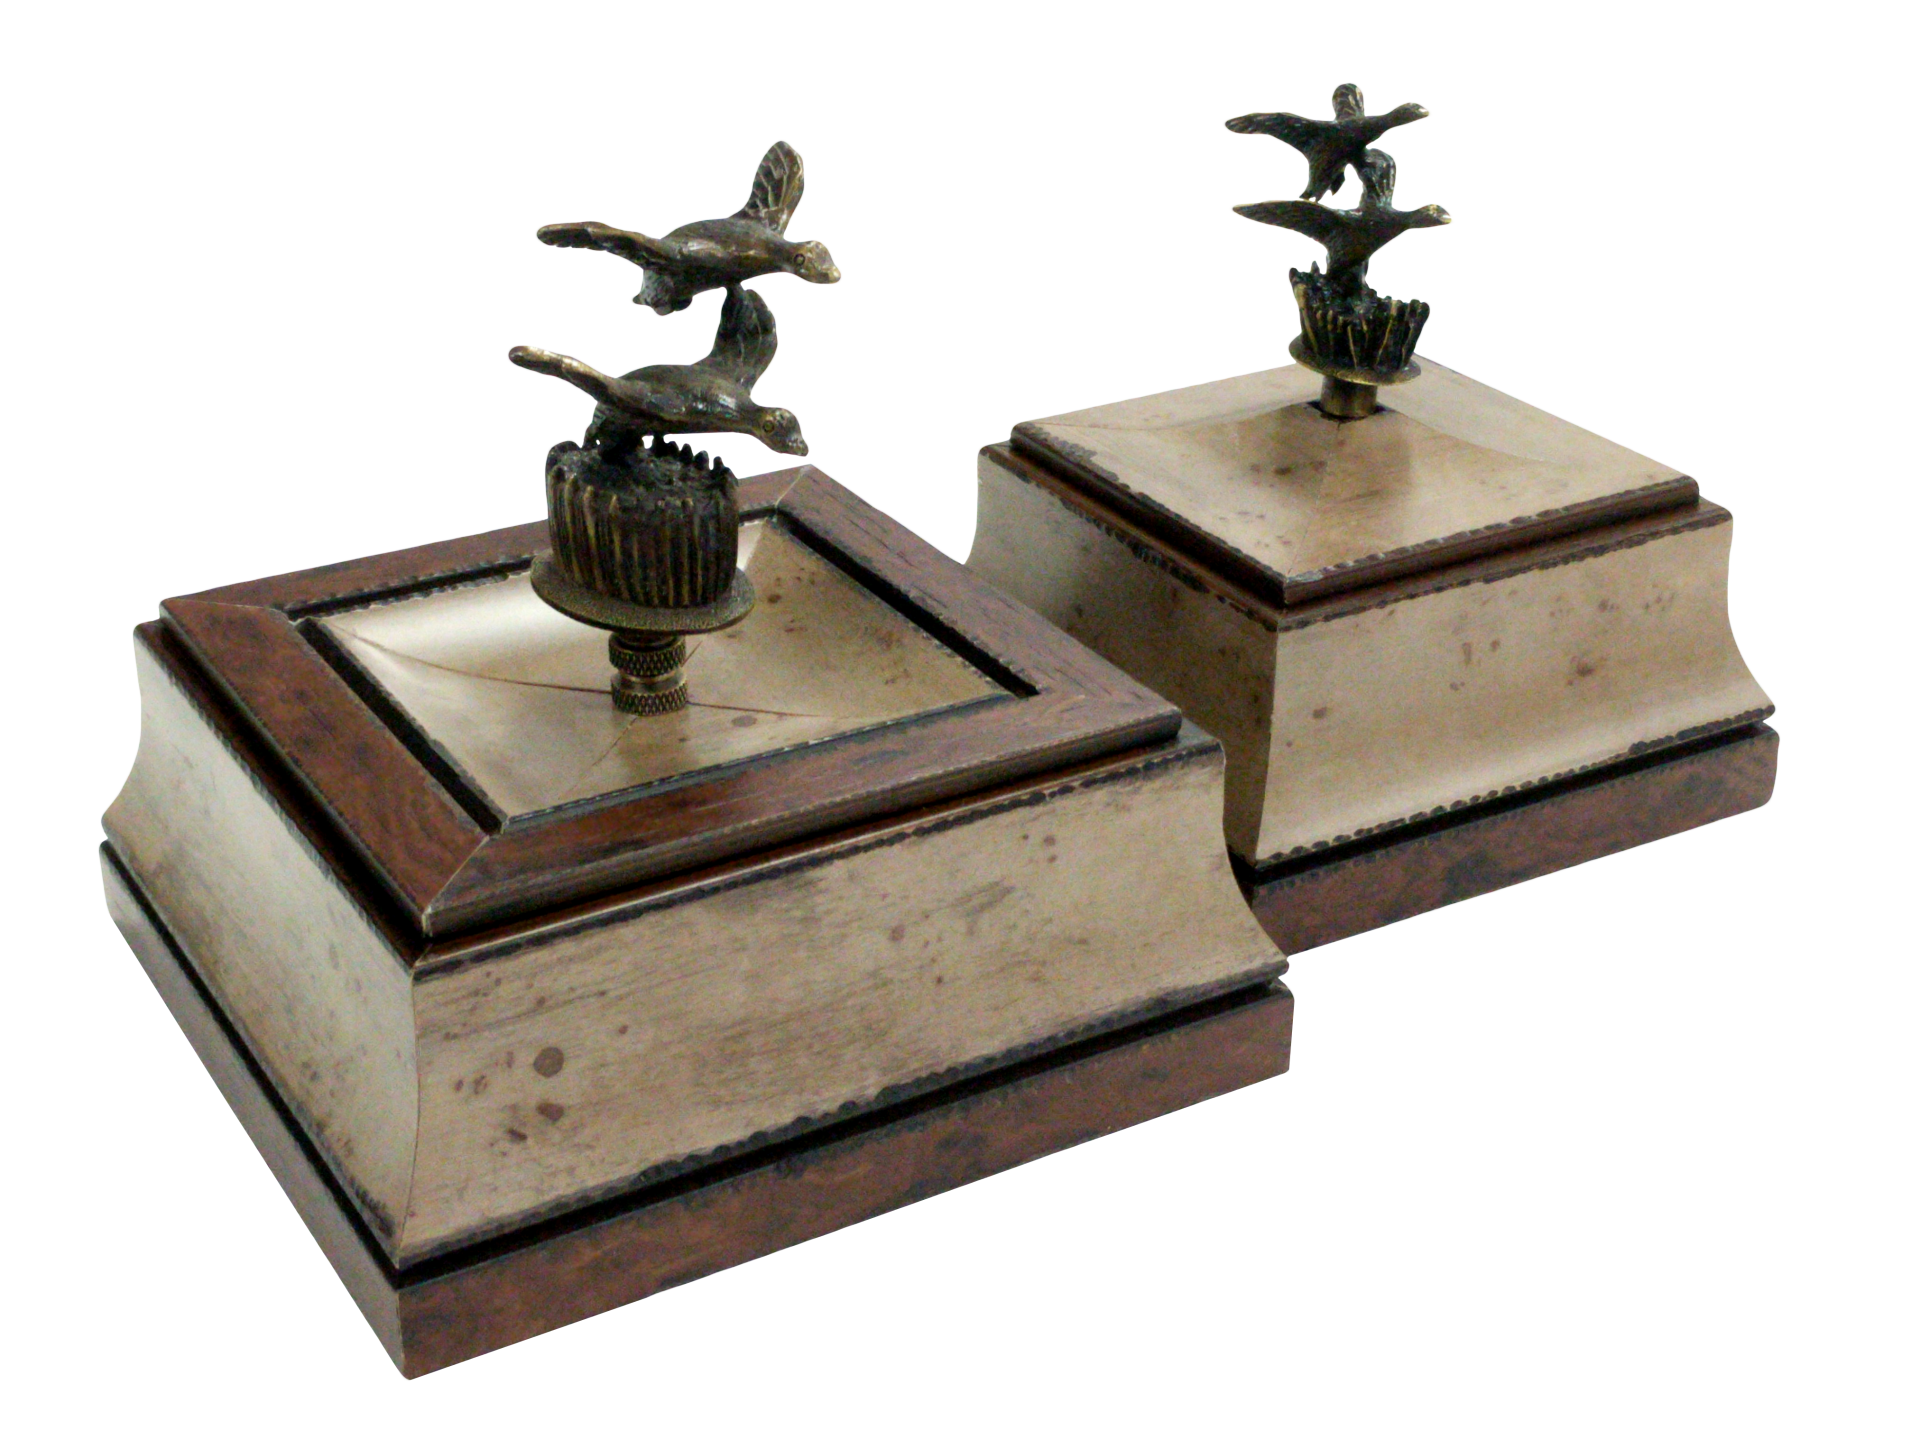 Sportsman - Large with Ducks in Flight by Goat Island Treasure Boxes